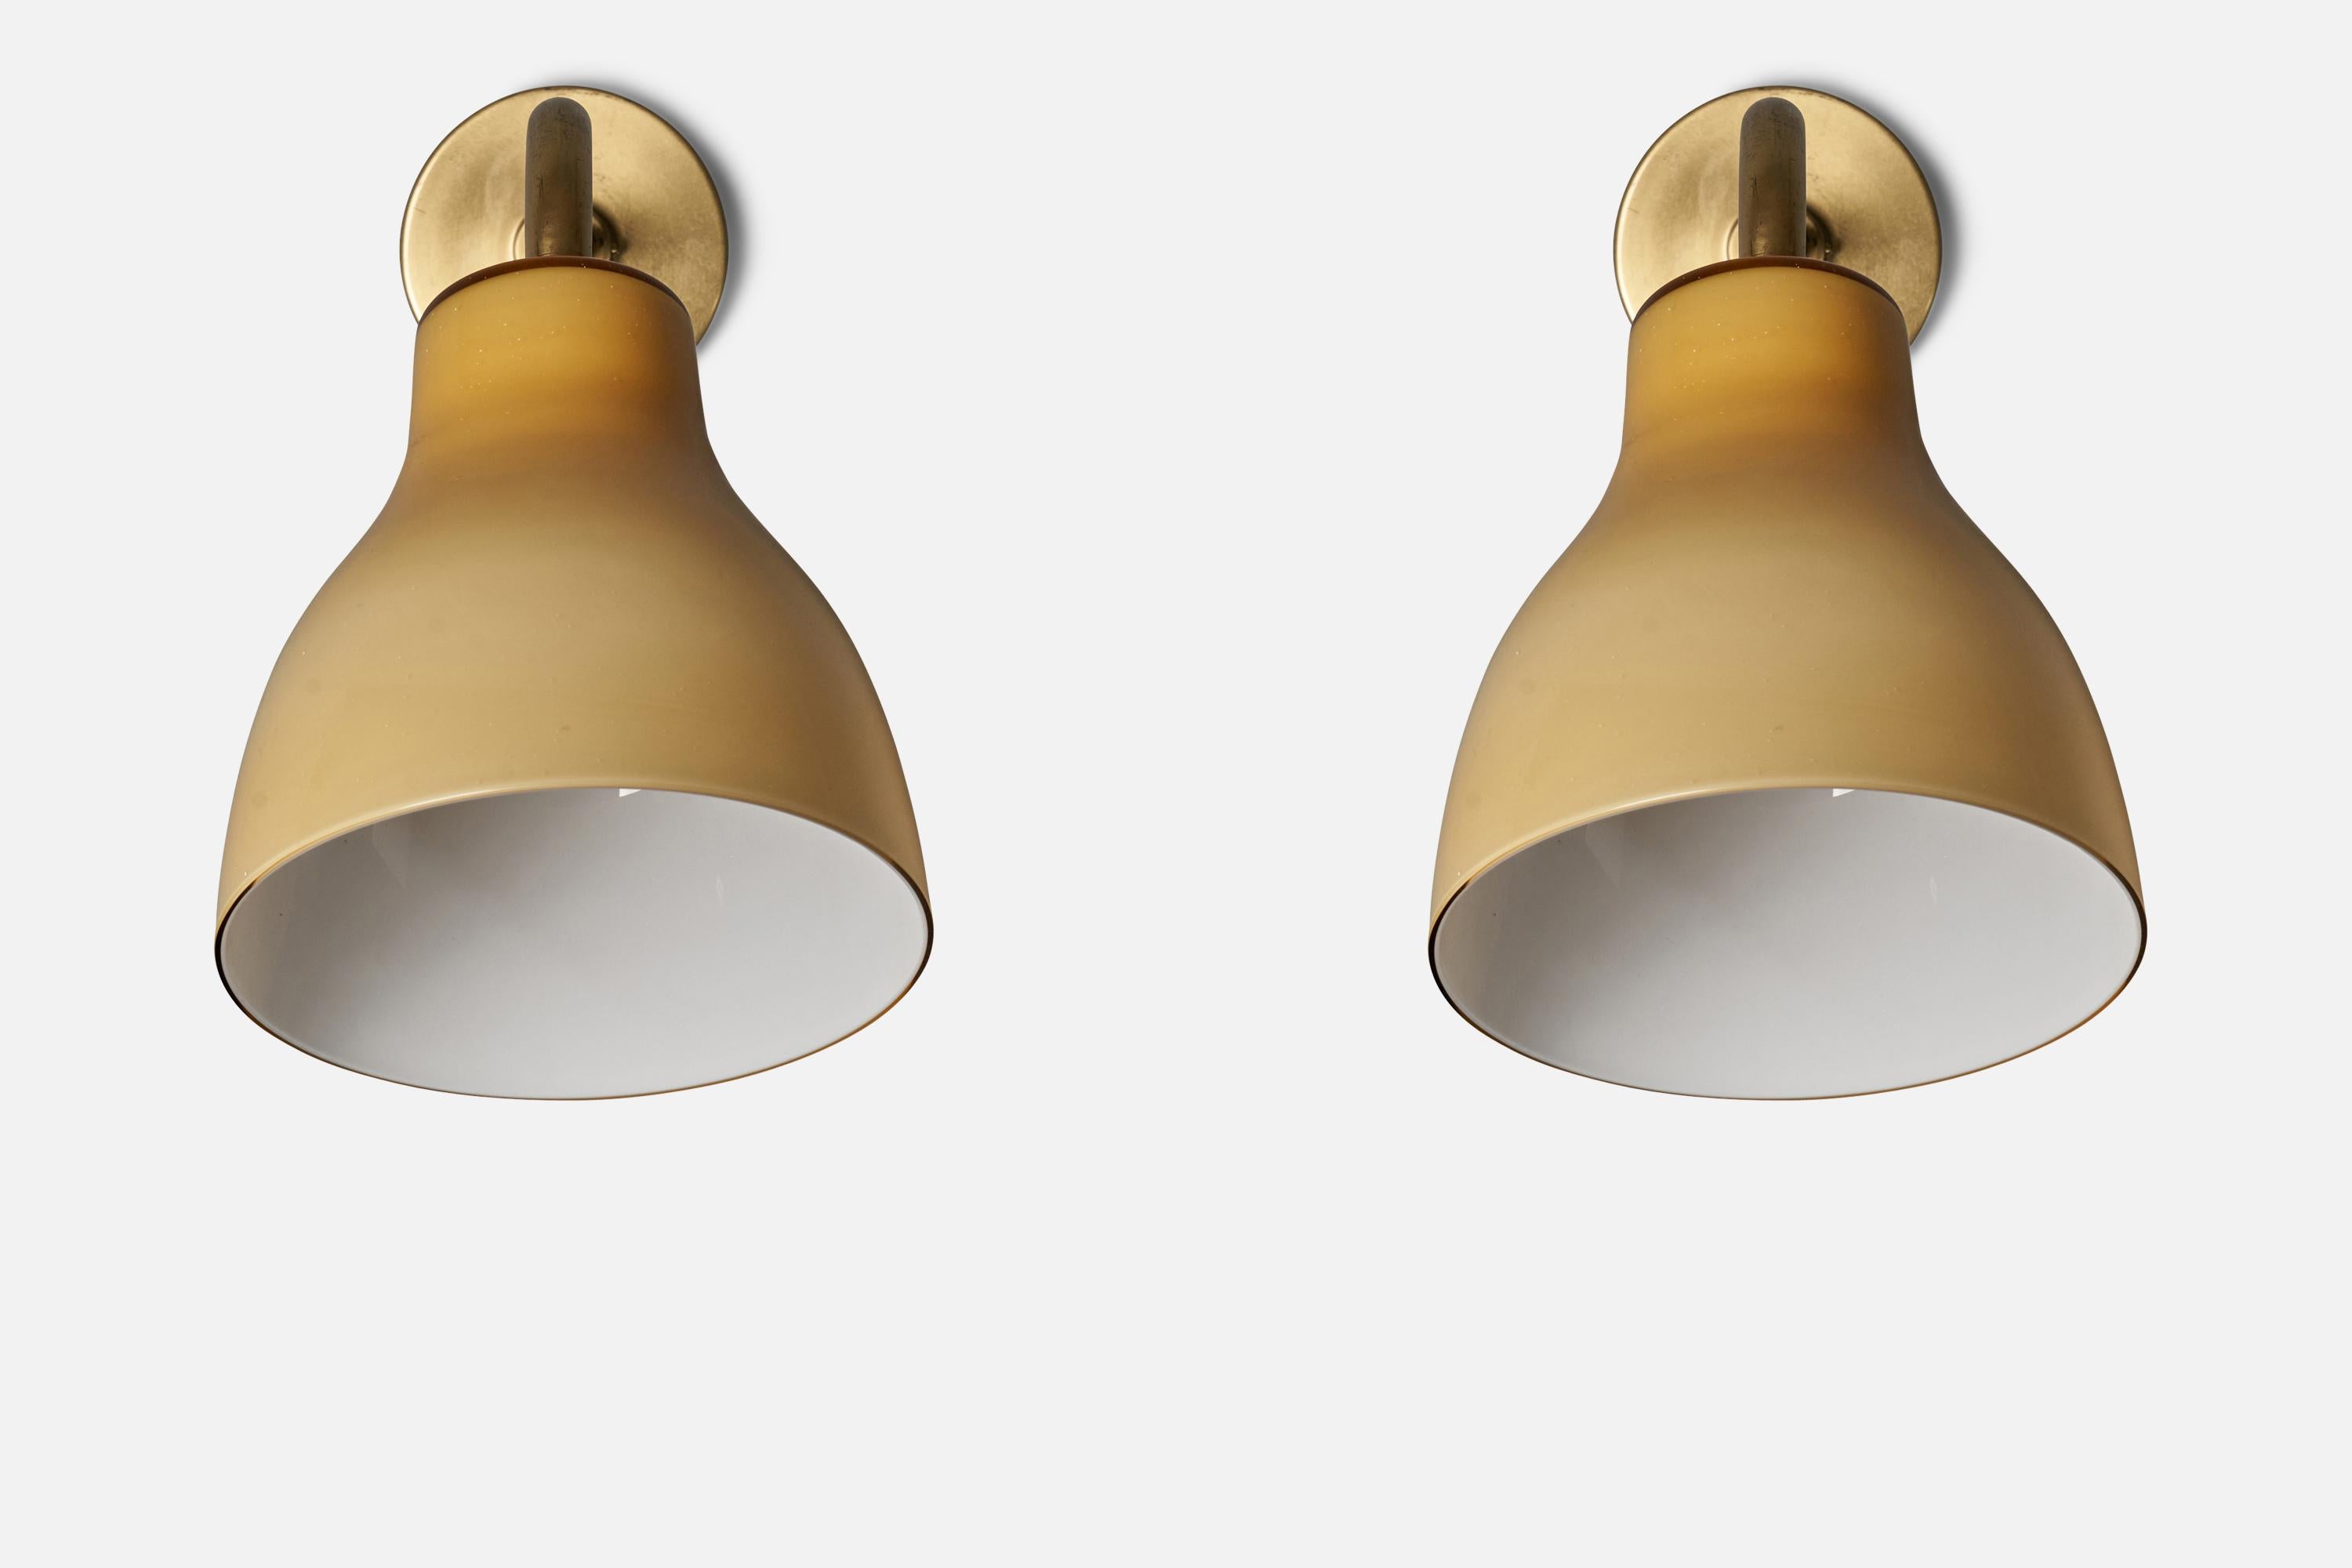 A pair of sizable wall lights. Produced by Bertil Brisborg, for Nordiska Kompaniet, 1940s. Features brass and original yellow glass.

Other designers of the period working in similar style include Hans Bergström, Paavo Tynell, Alvar Aalto, Serge